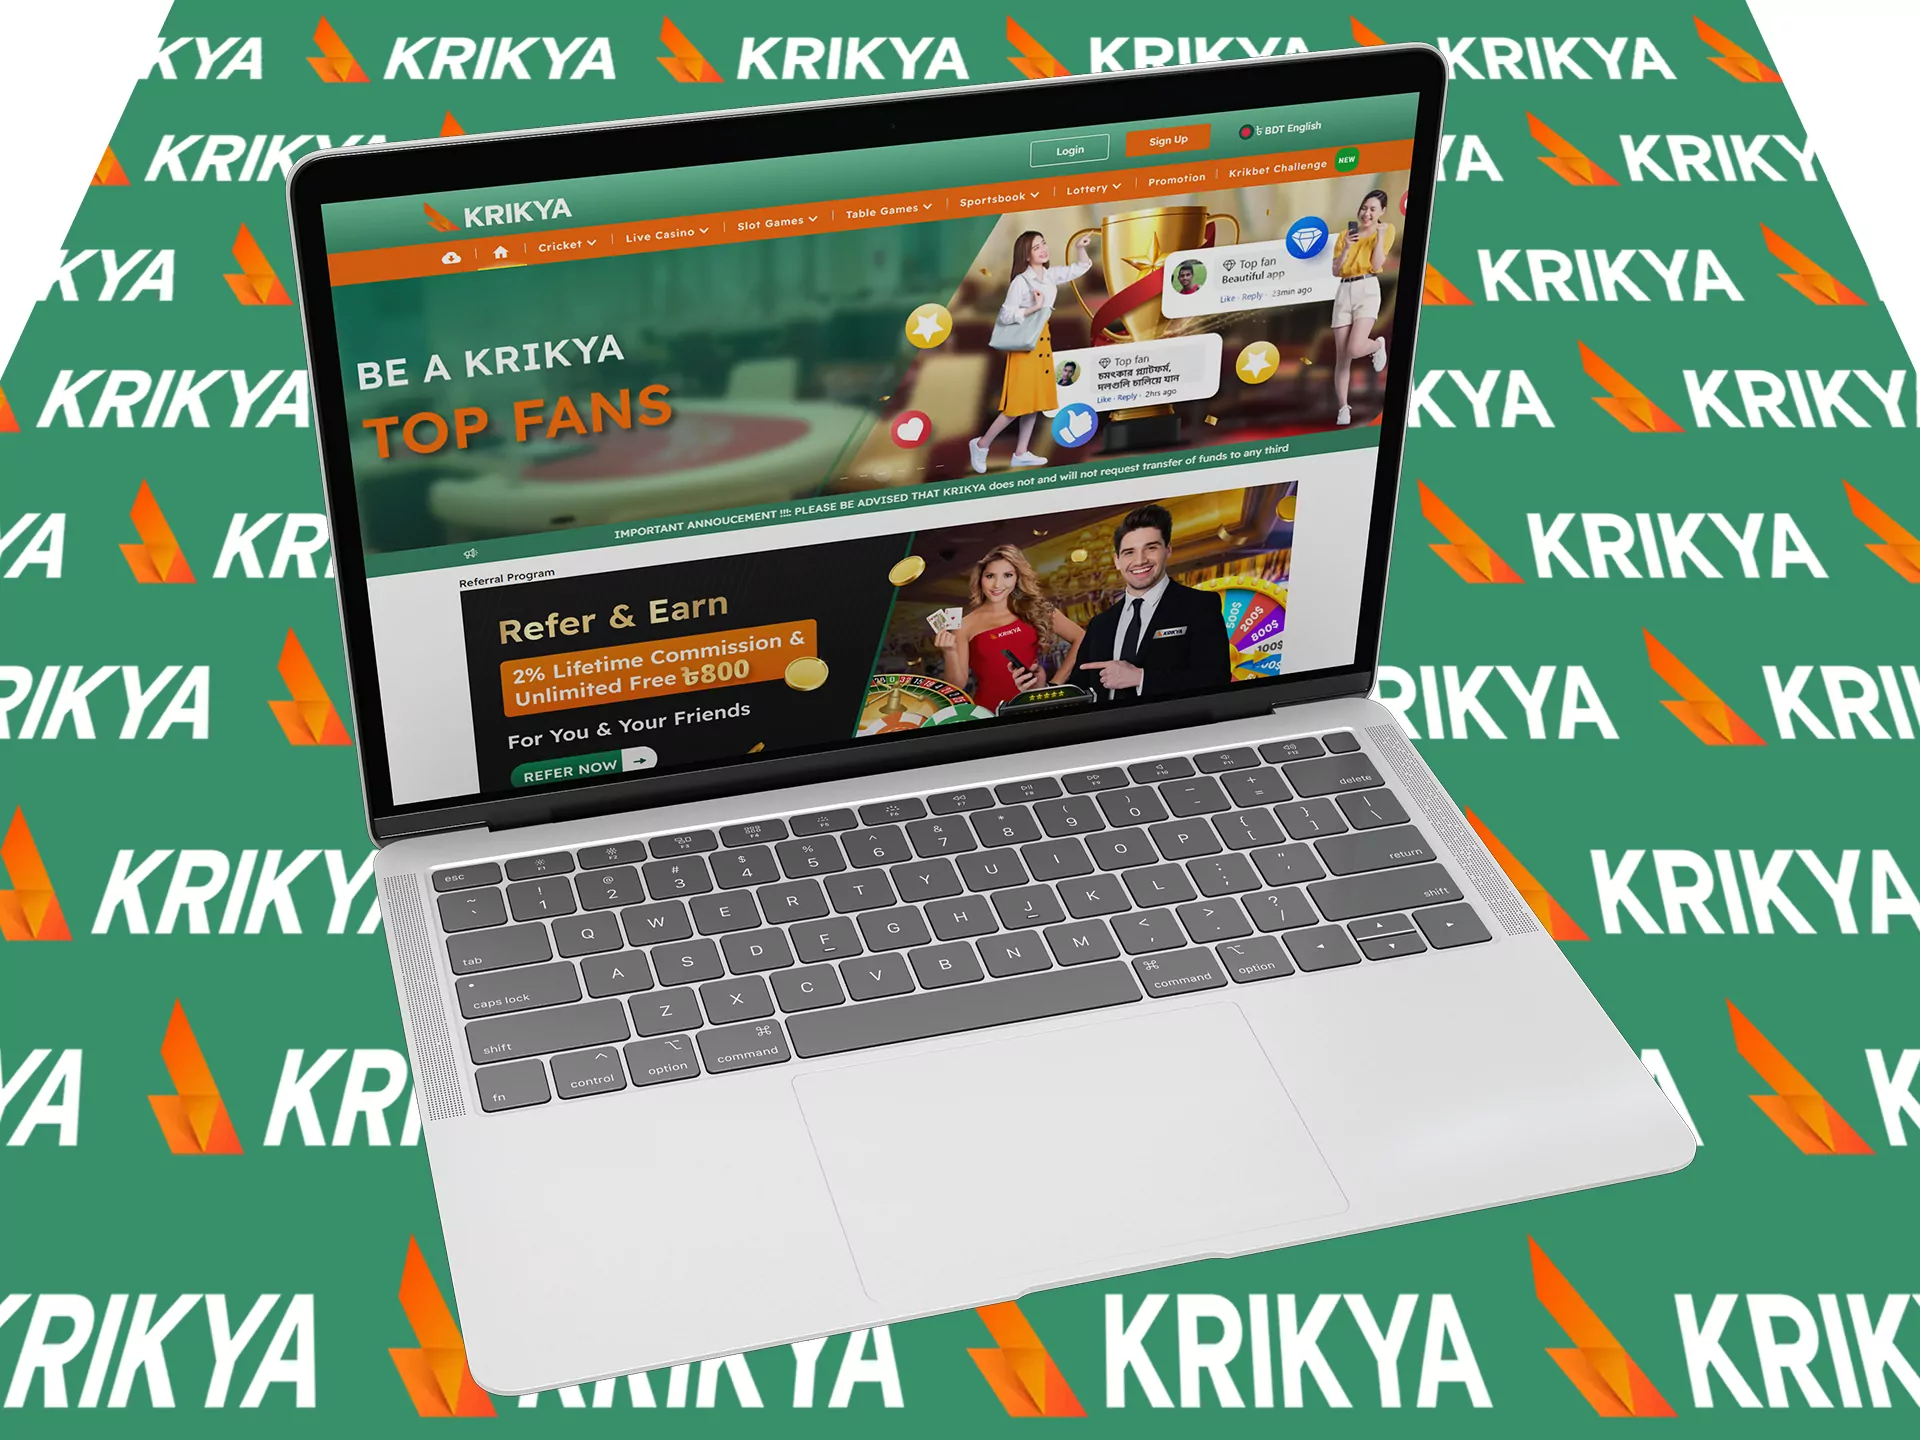 Krikya website is the best place in Bangladesh where you can bet and play casinos.